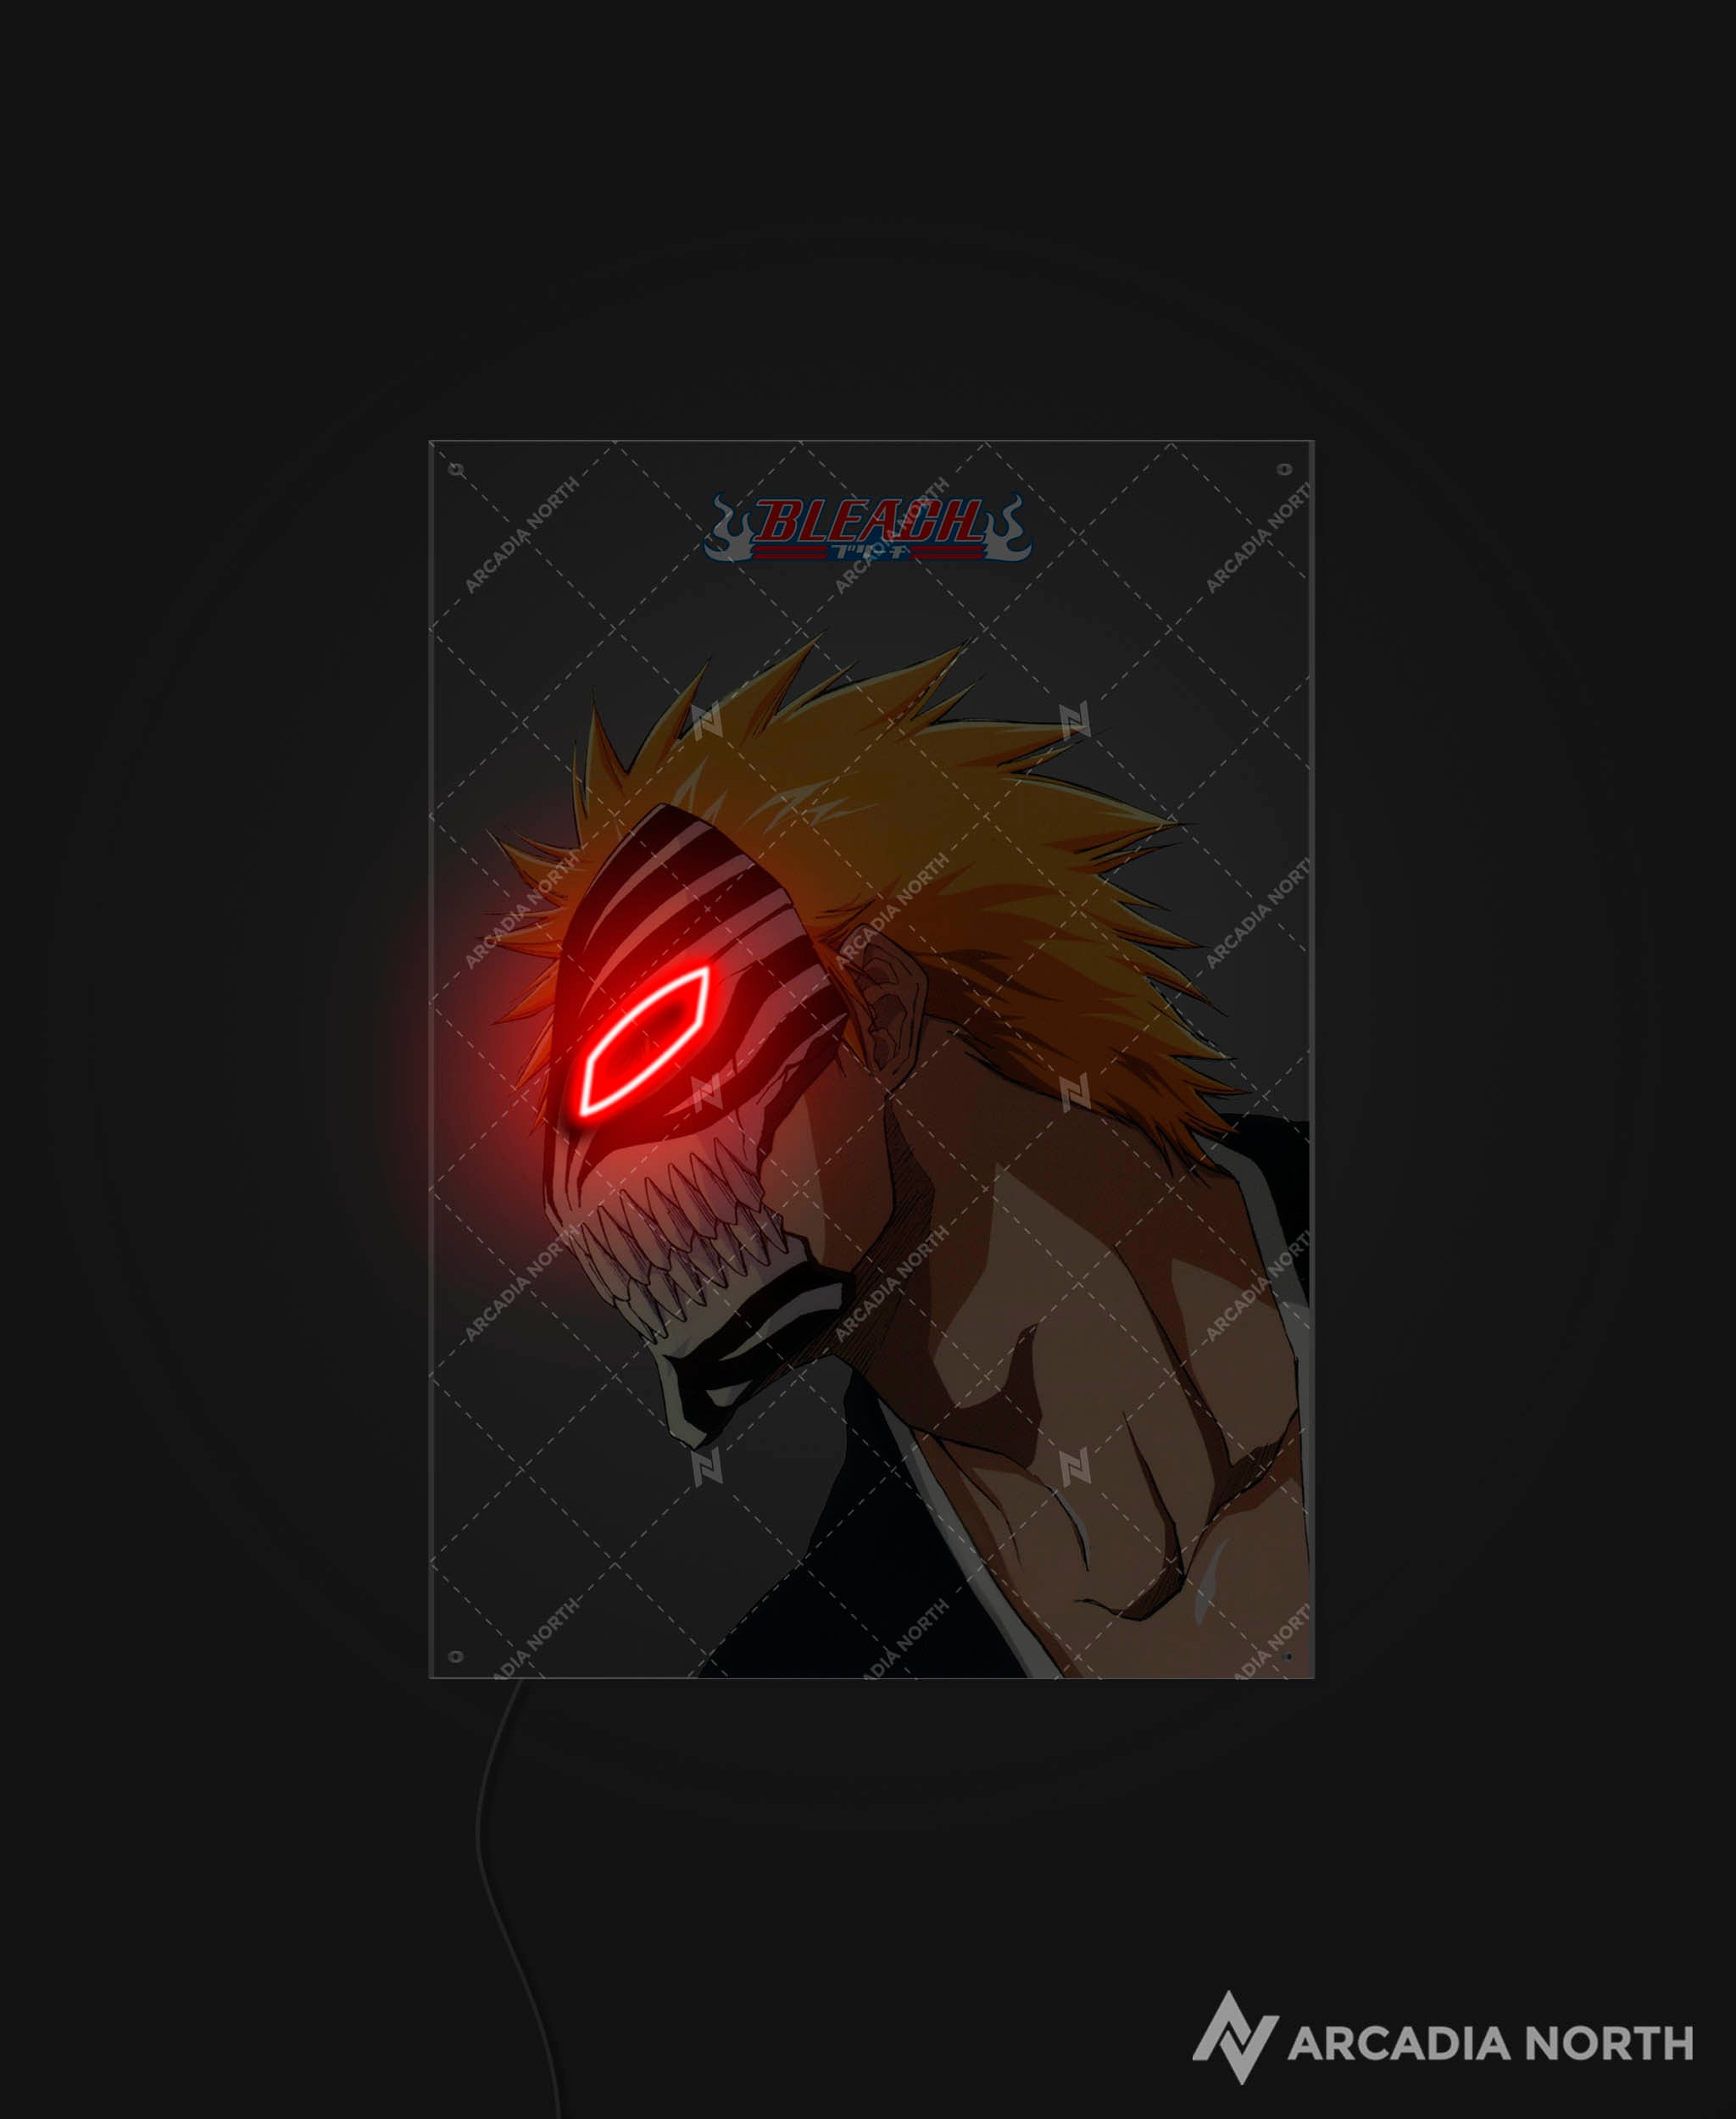 Arcadia North AURALIGHT - an LED Poster featuring the anime Bleach with Ichigo Kurosaki with his Hollow mask on with eyes illuminated by glowing neon LED light. UV-printed on acrylic.